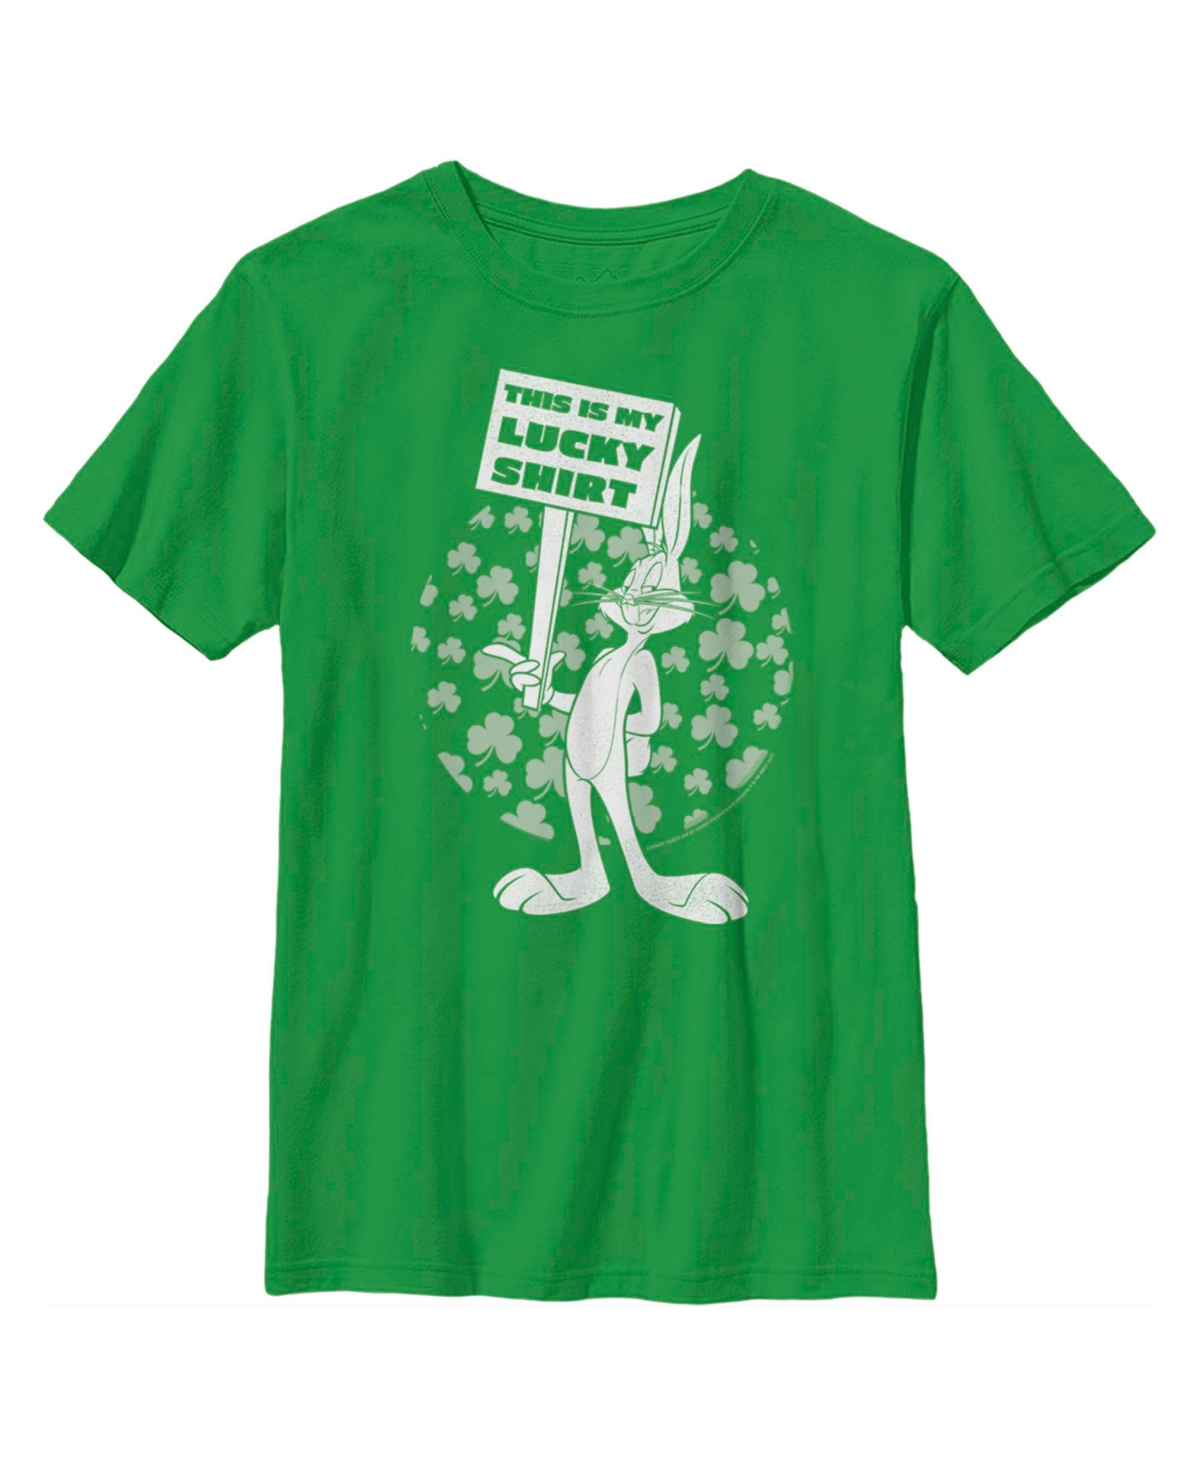 Warner Bros Kids' Boy's Looney Tunes St. Patrick's Day Bugs Bunny This Is My Lucky Shirt Child T-shirt In Kelly Green